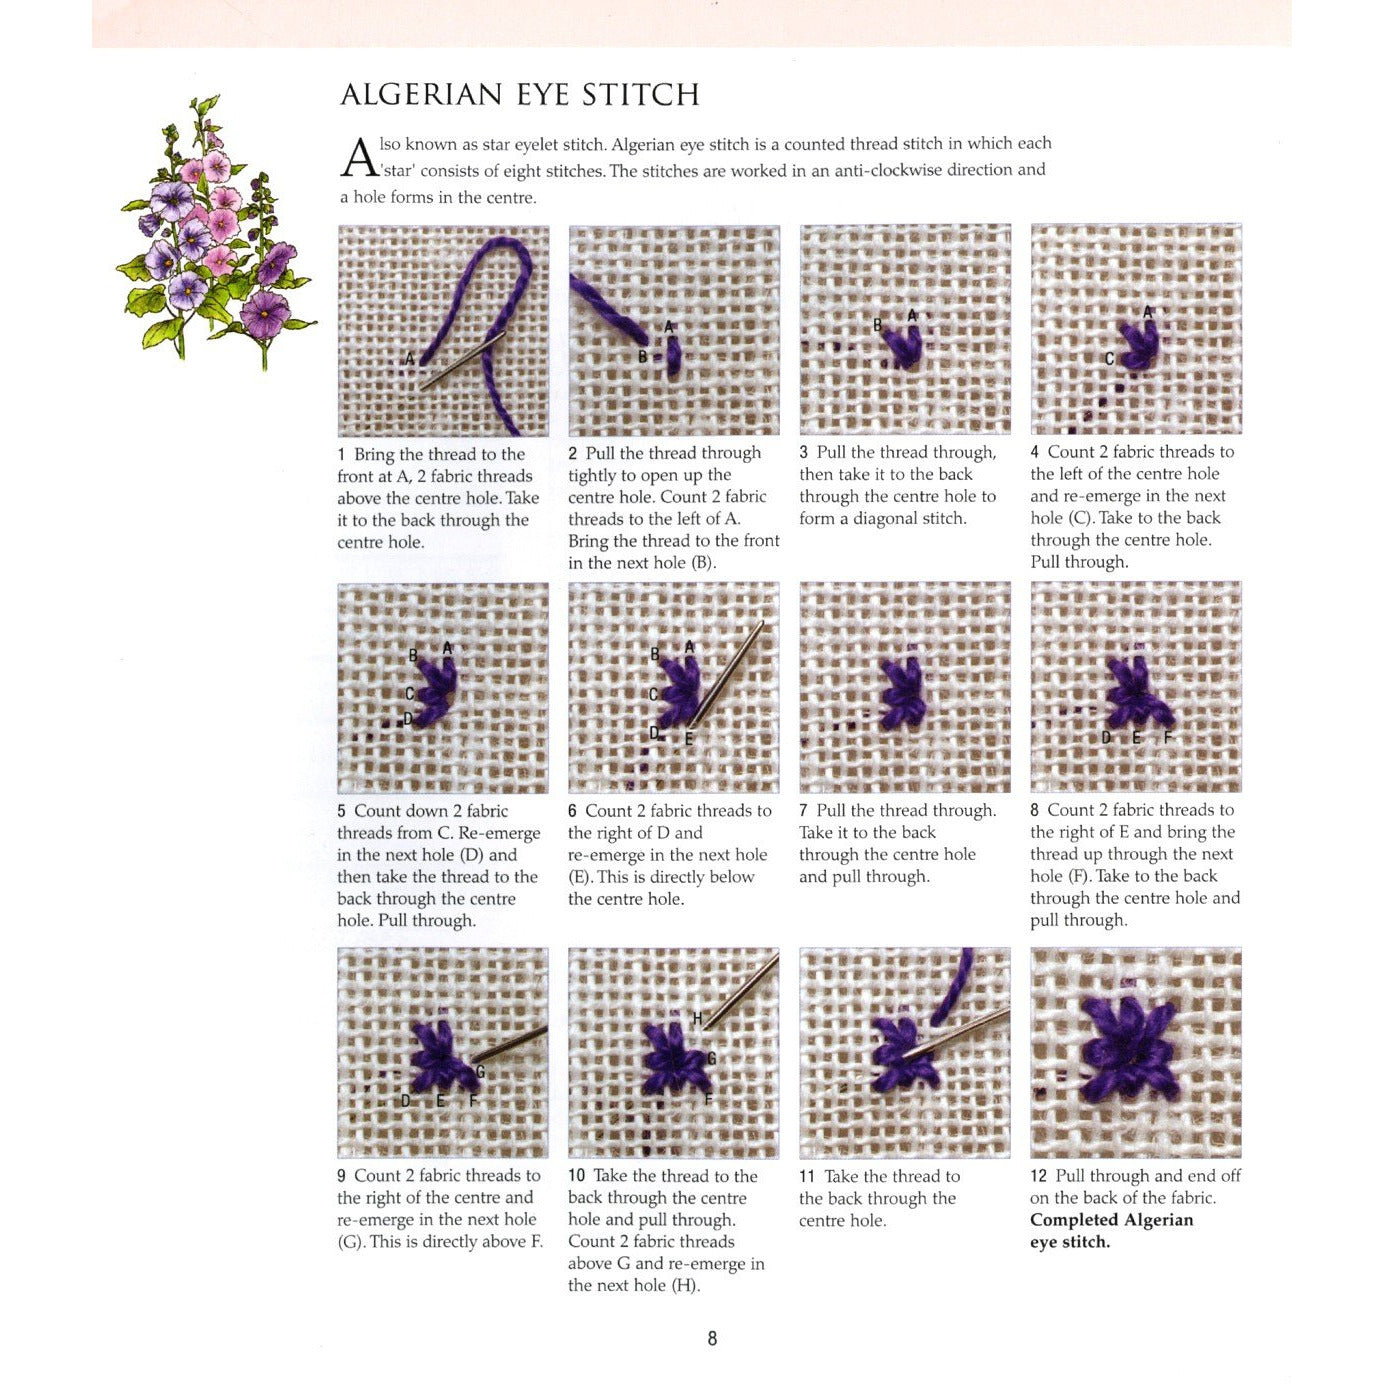 A-Z of Embroidery Stitches